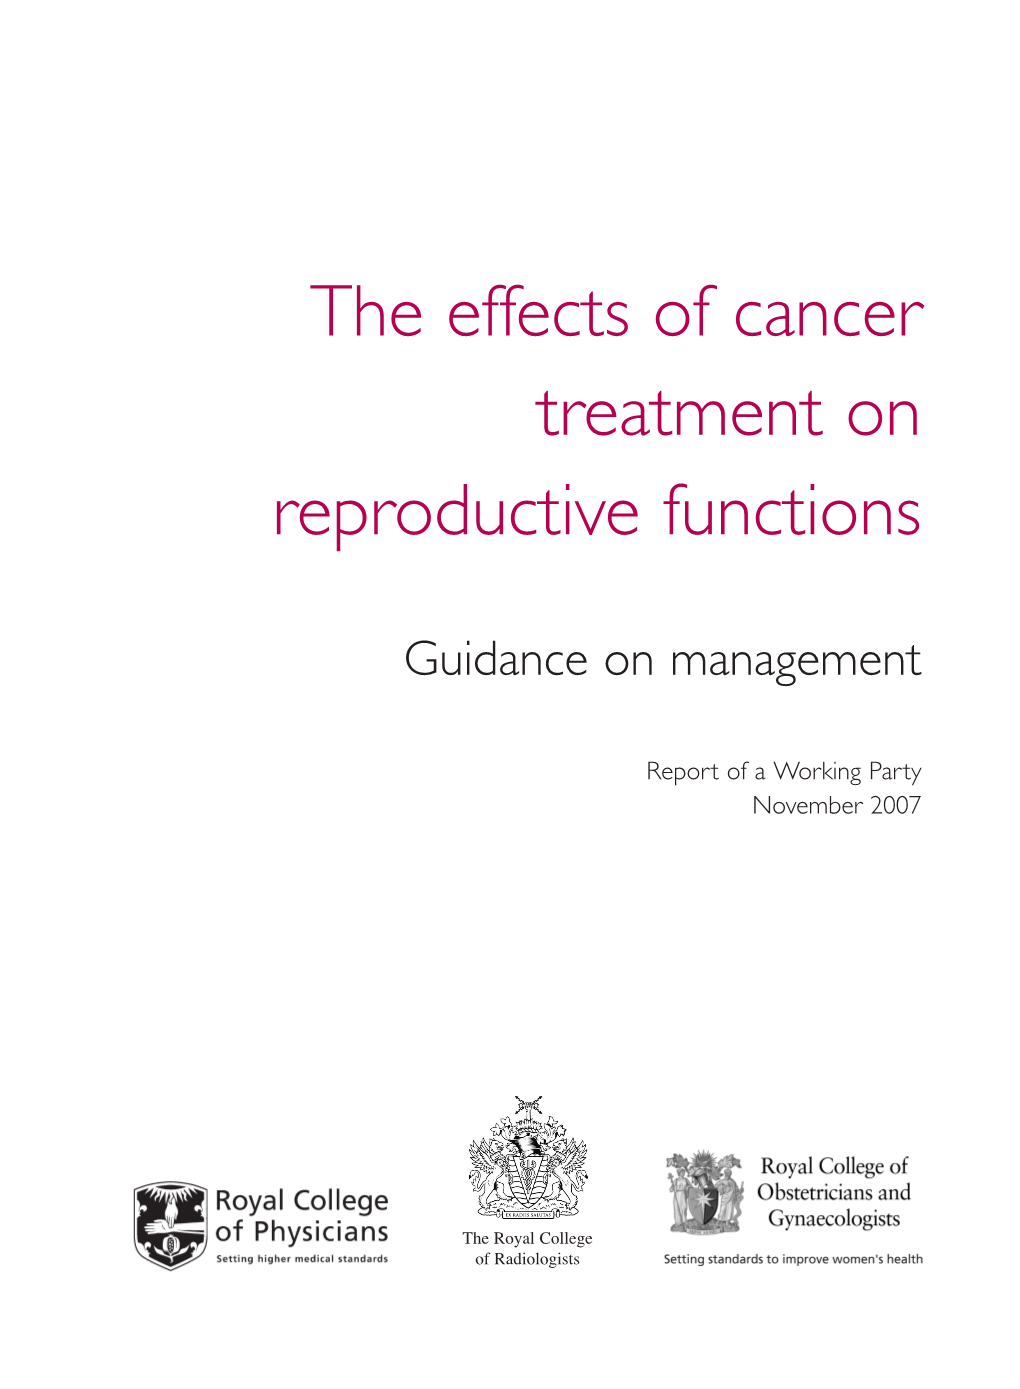 The Effects of Cancer Treatment on Reproductive Functions. Guidance on Management